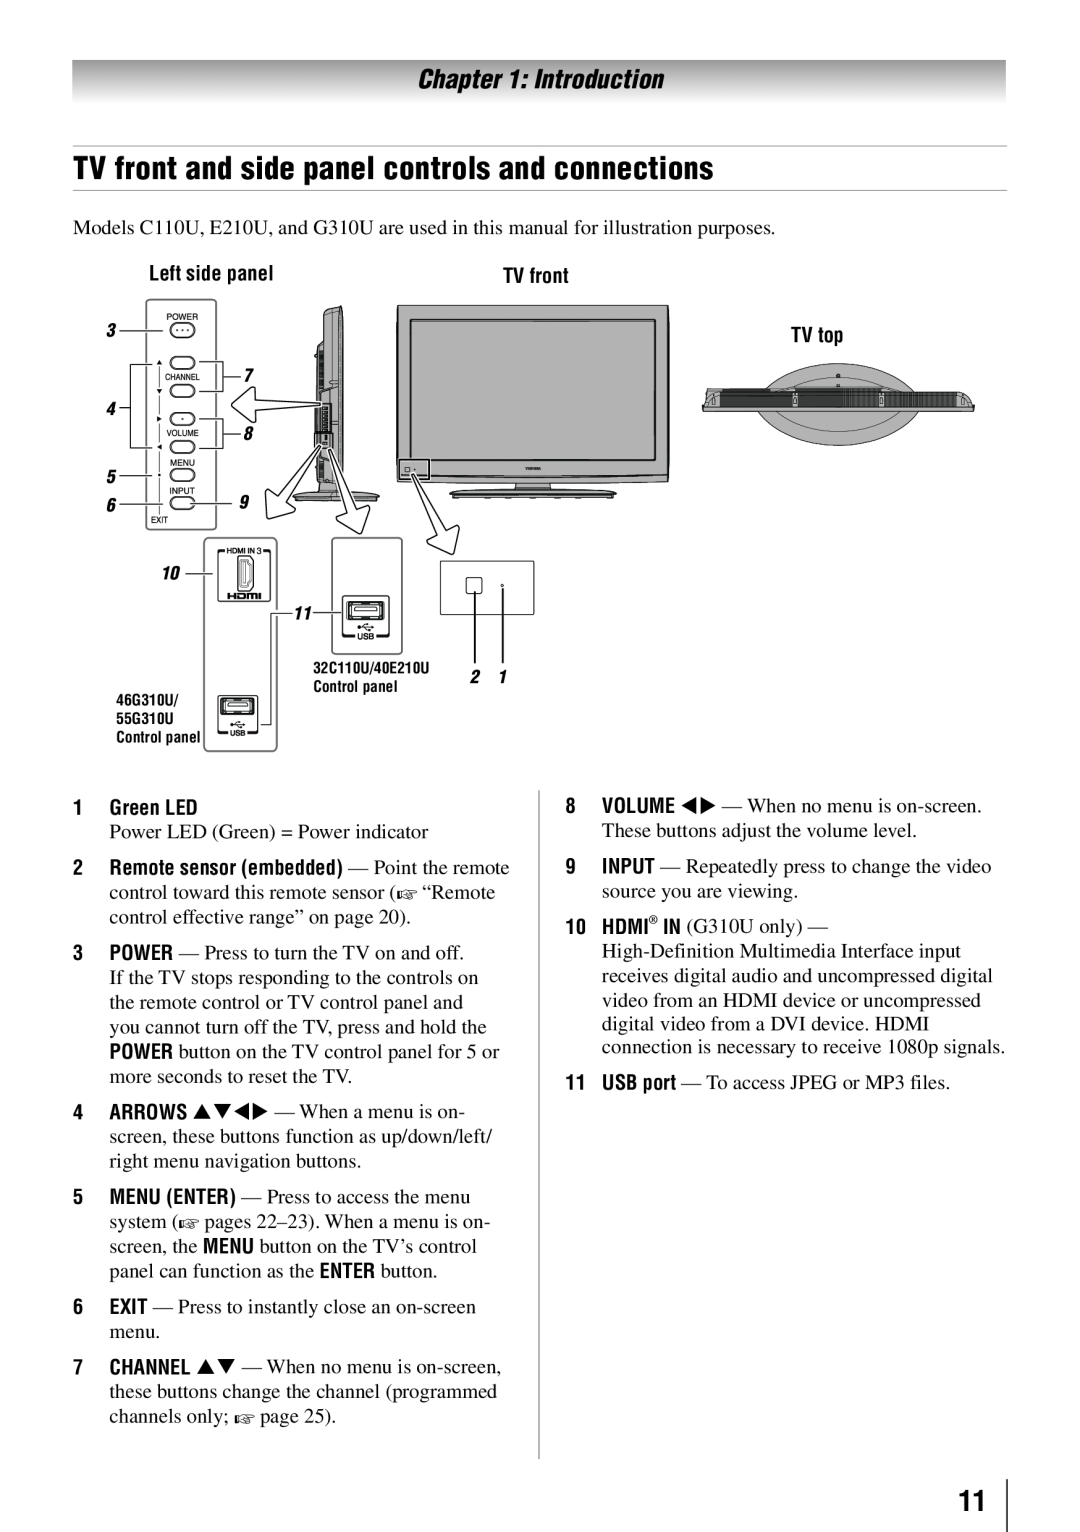 Toshiba 46G310U TV front and side panel controls and connections, Introduction, Left side panel, TV top, 1無 Green LED 